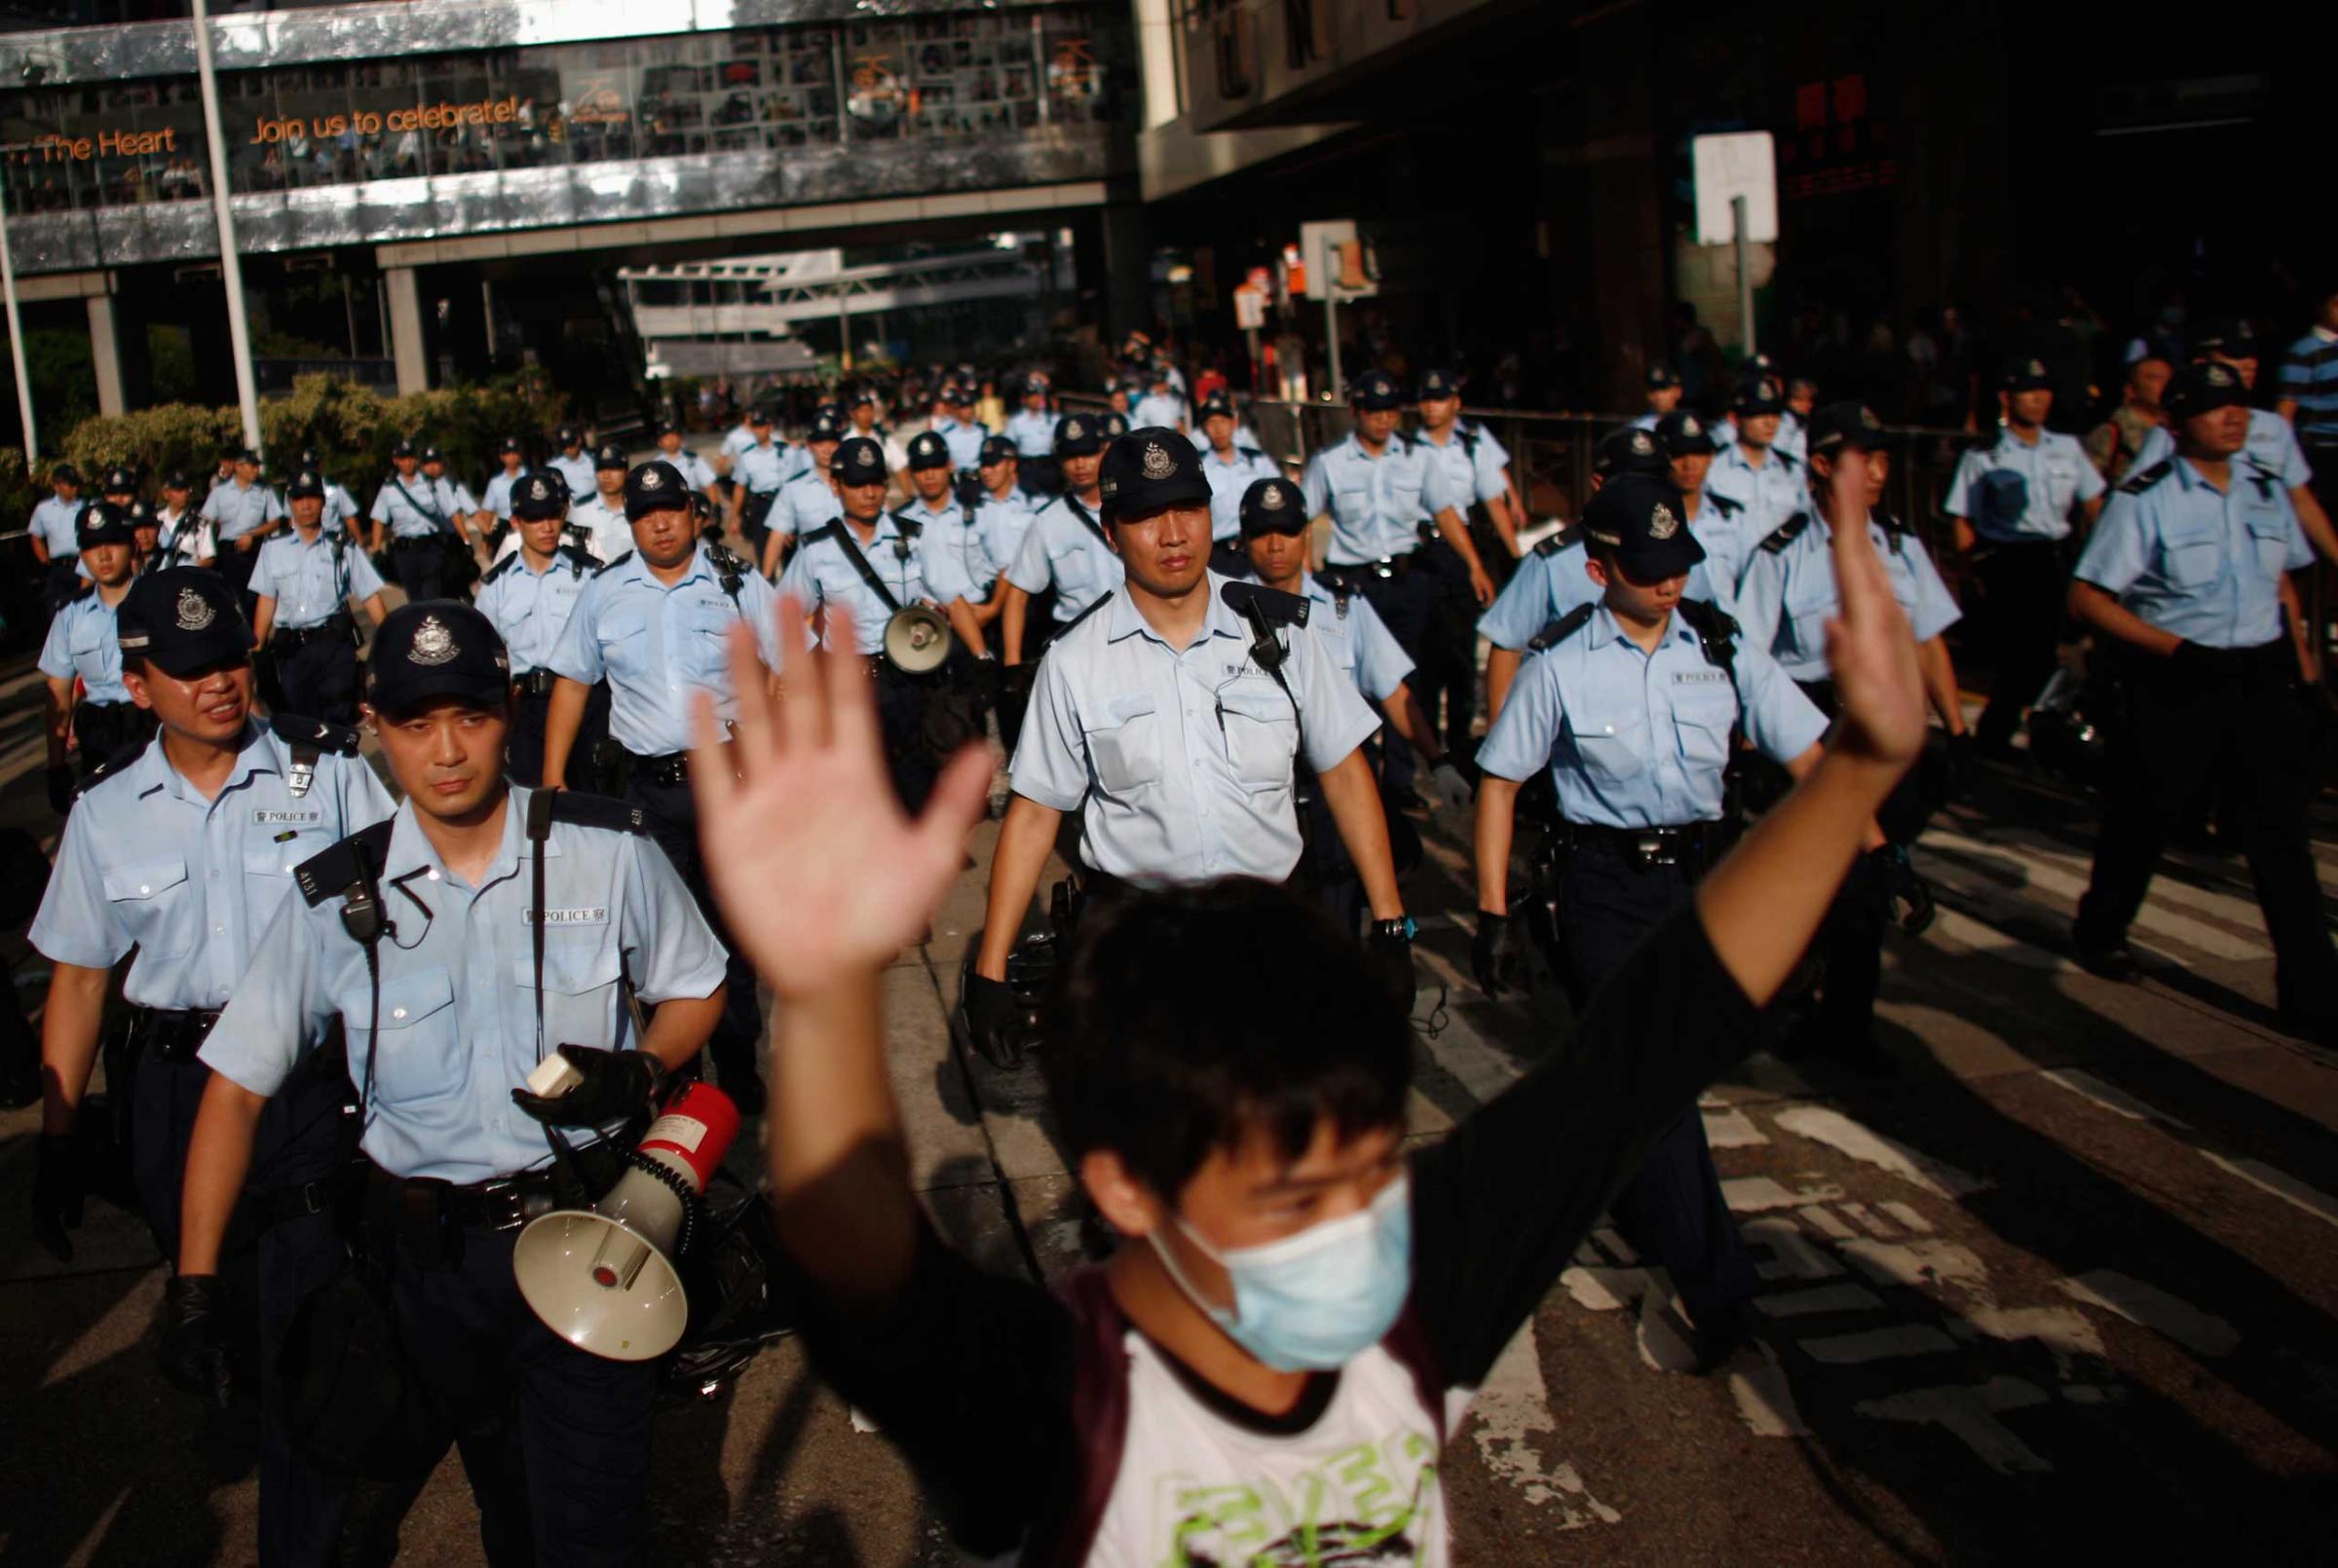 A protester raises his arms as police officers try to disperse the crowd near the government headquarters in Hong Kong, Sept. 29, 2014.